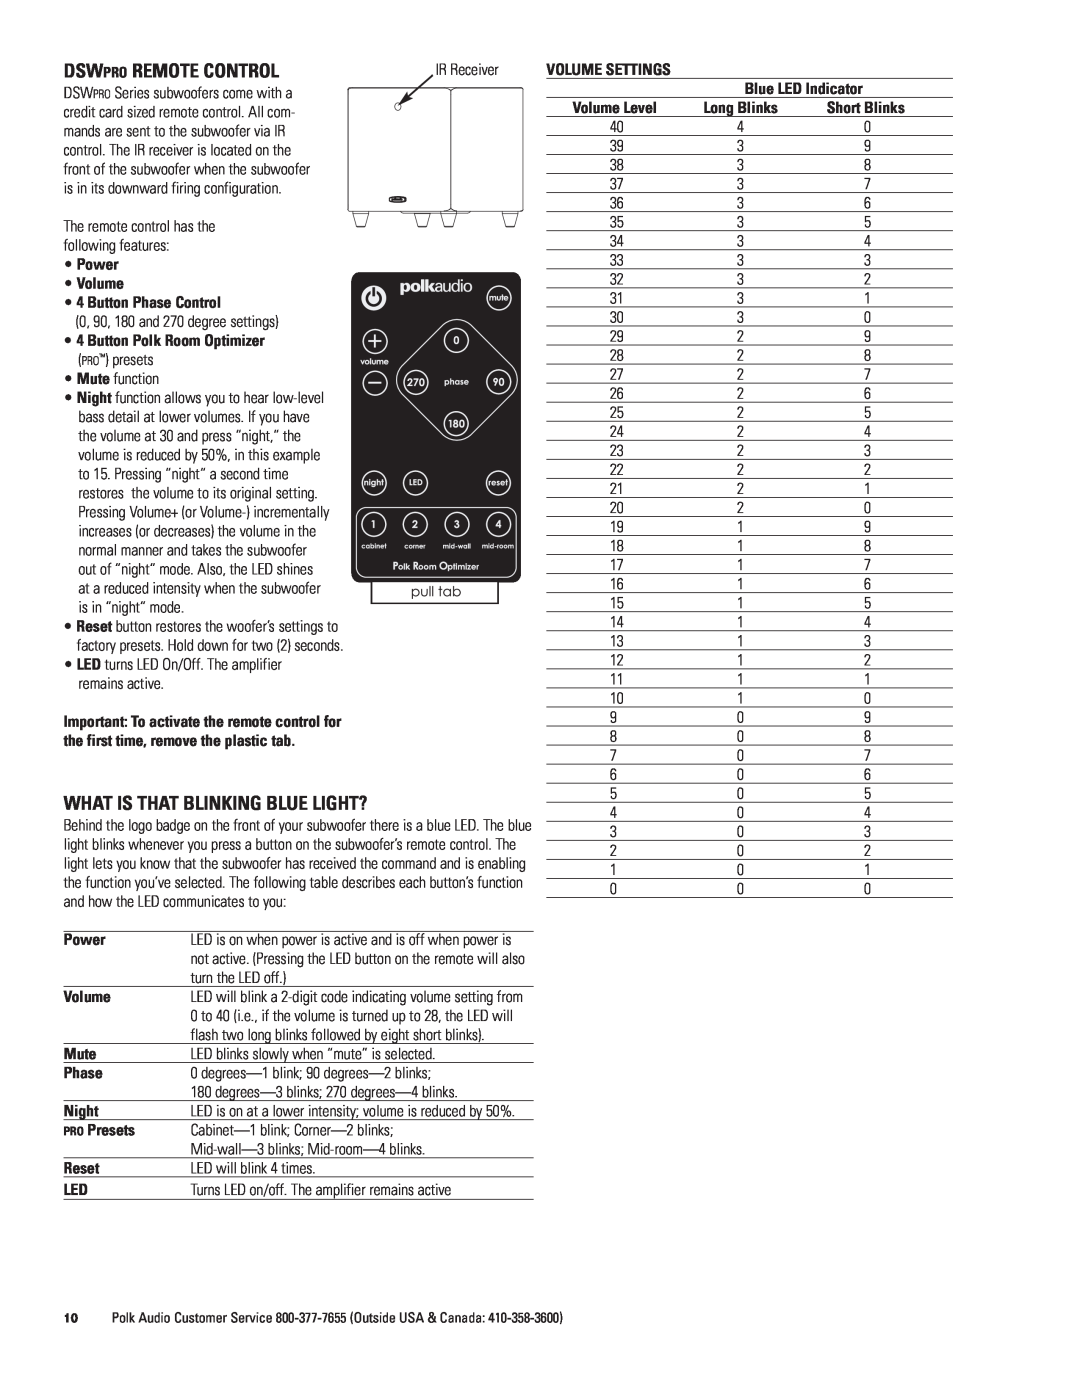 Polk Audio DSWPRO400, DSWPRO500, DSWPRO600 owner manual Dswpro Remote Control, What Is That Blinking Blue Light? 